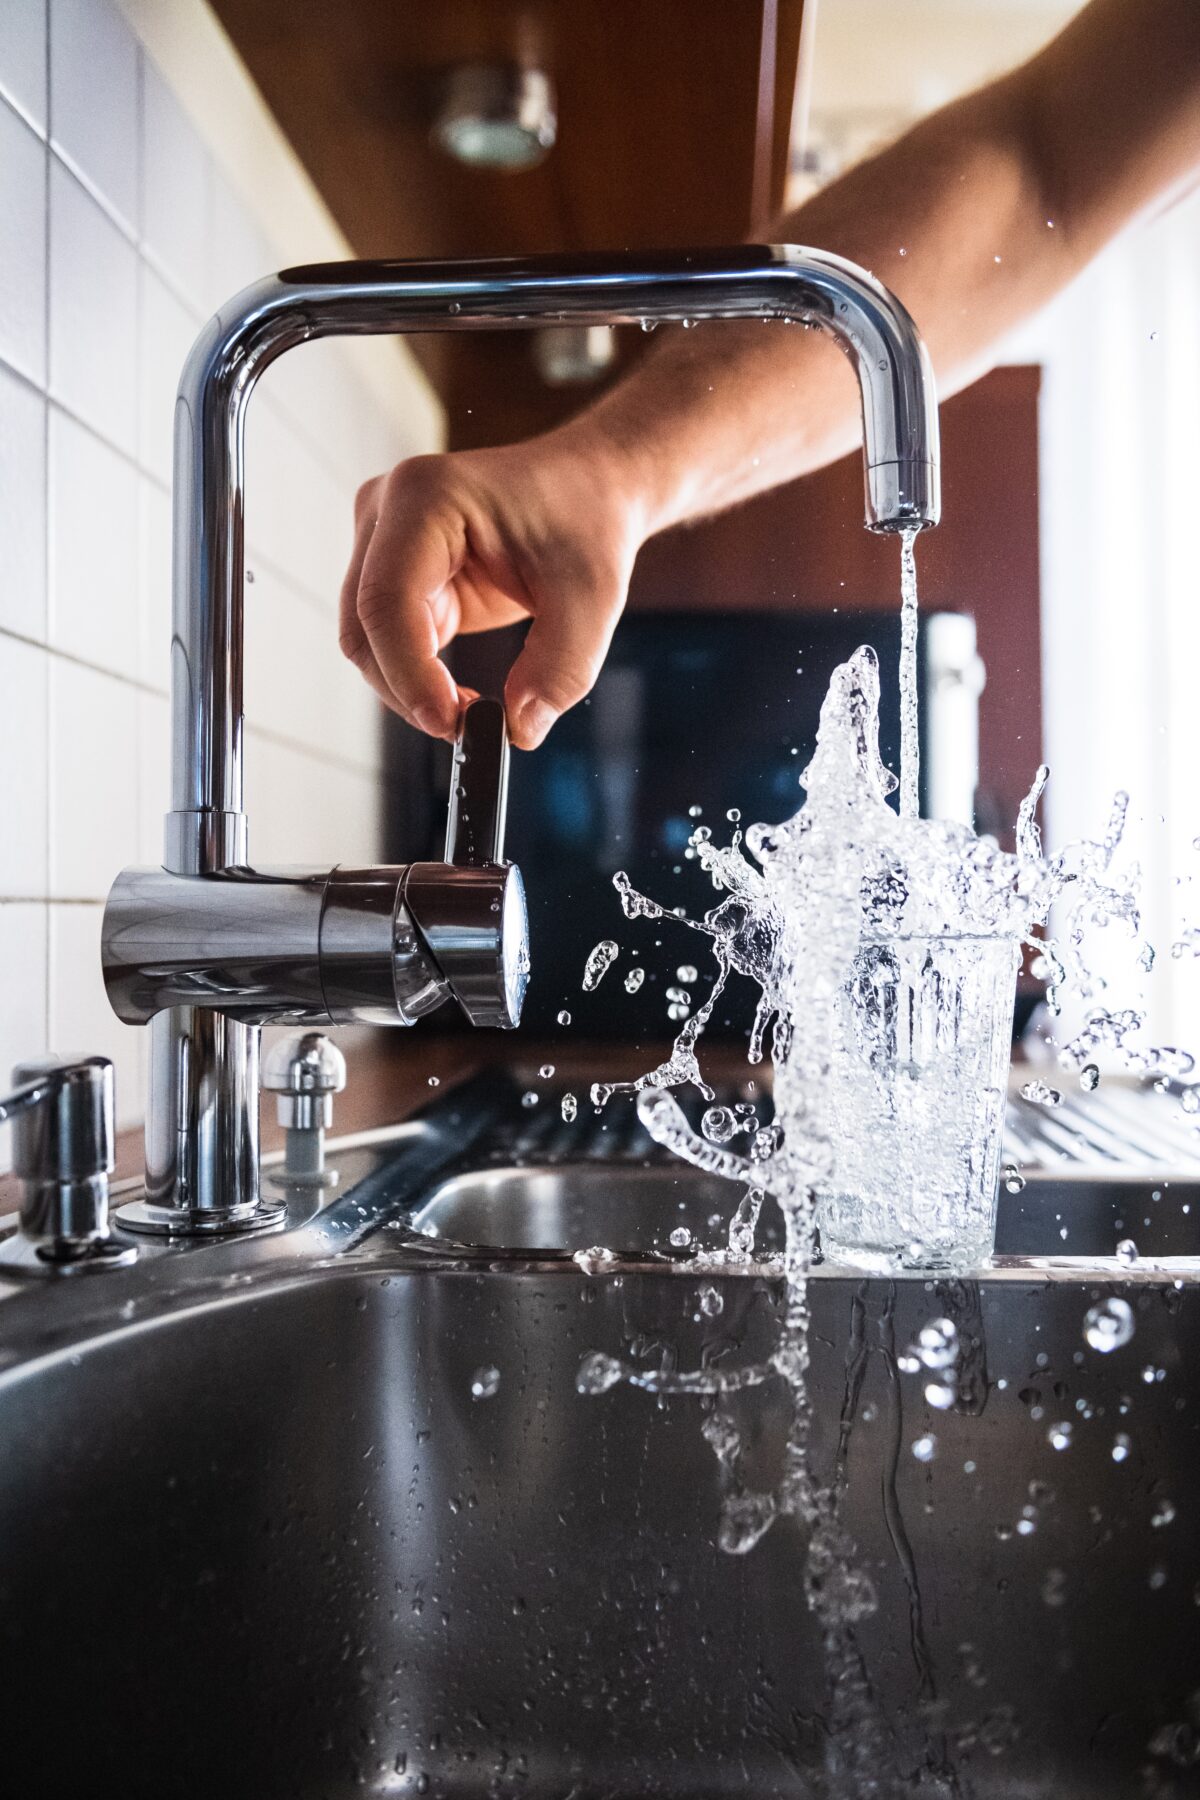 an image of a Broken faucet with water pouring out onto sink